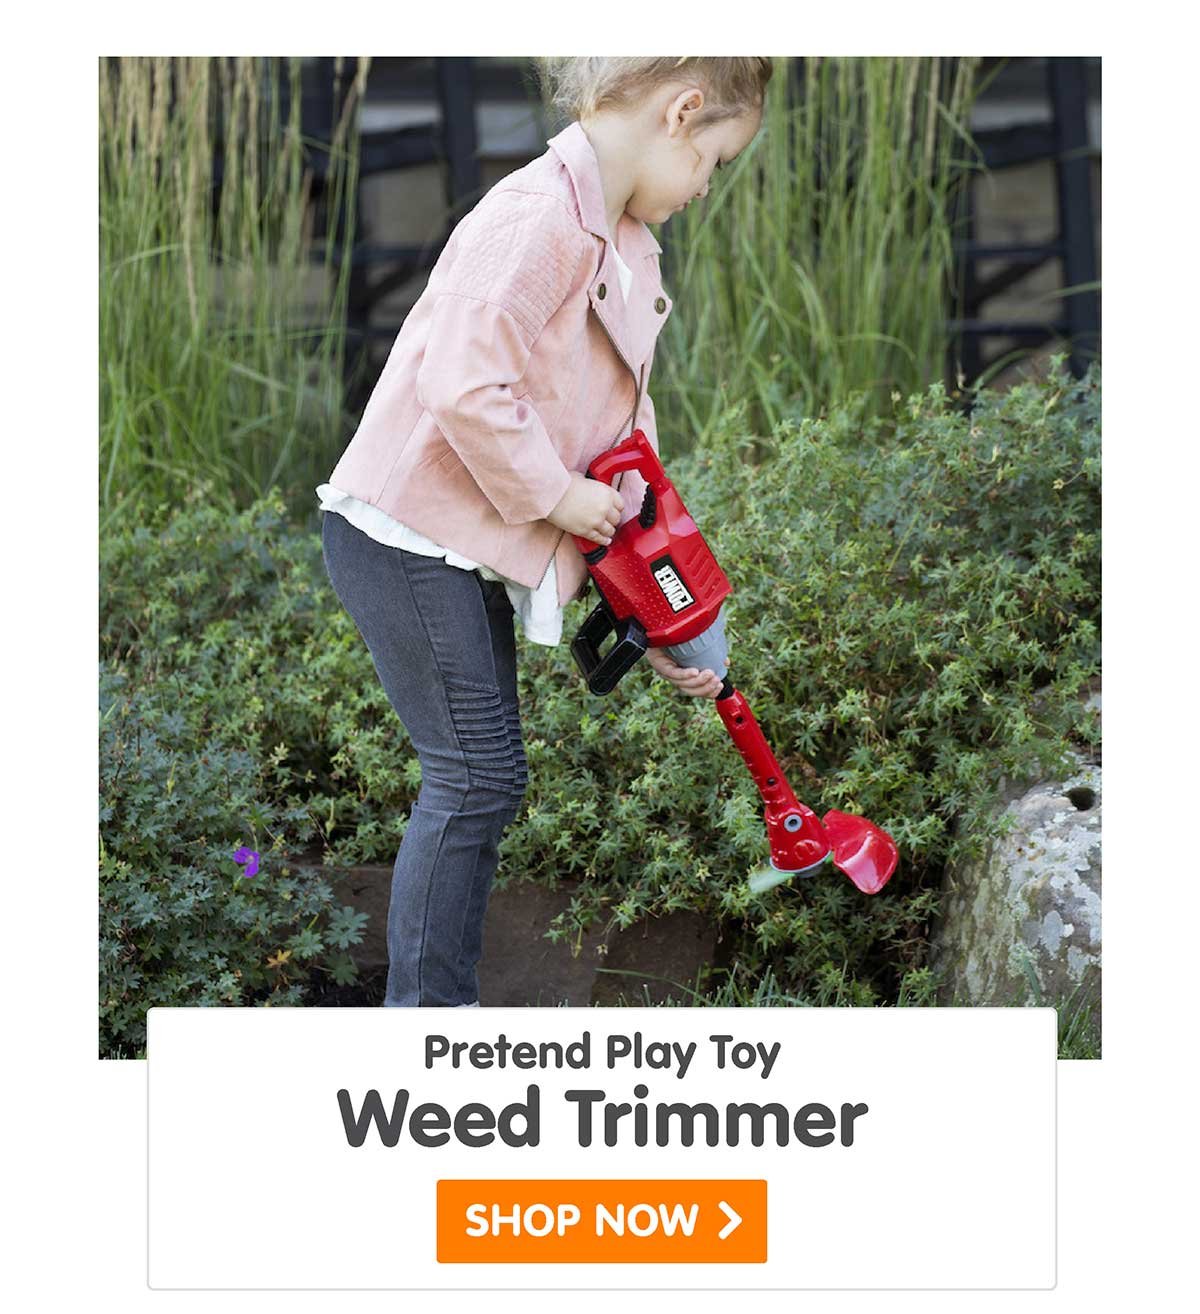 Weed Trimmer Pretend Play Toy